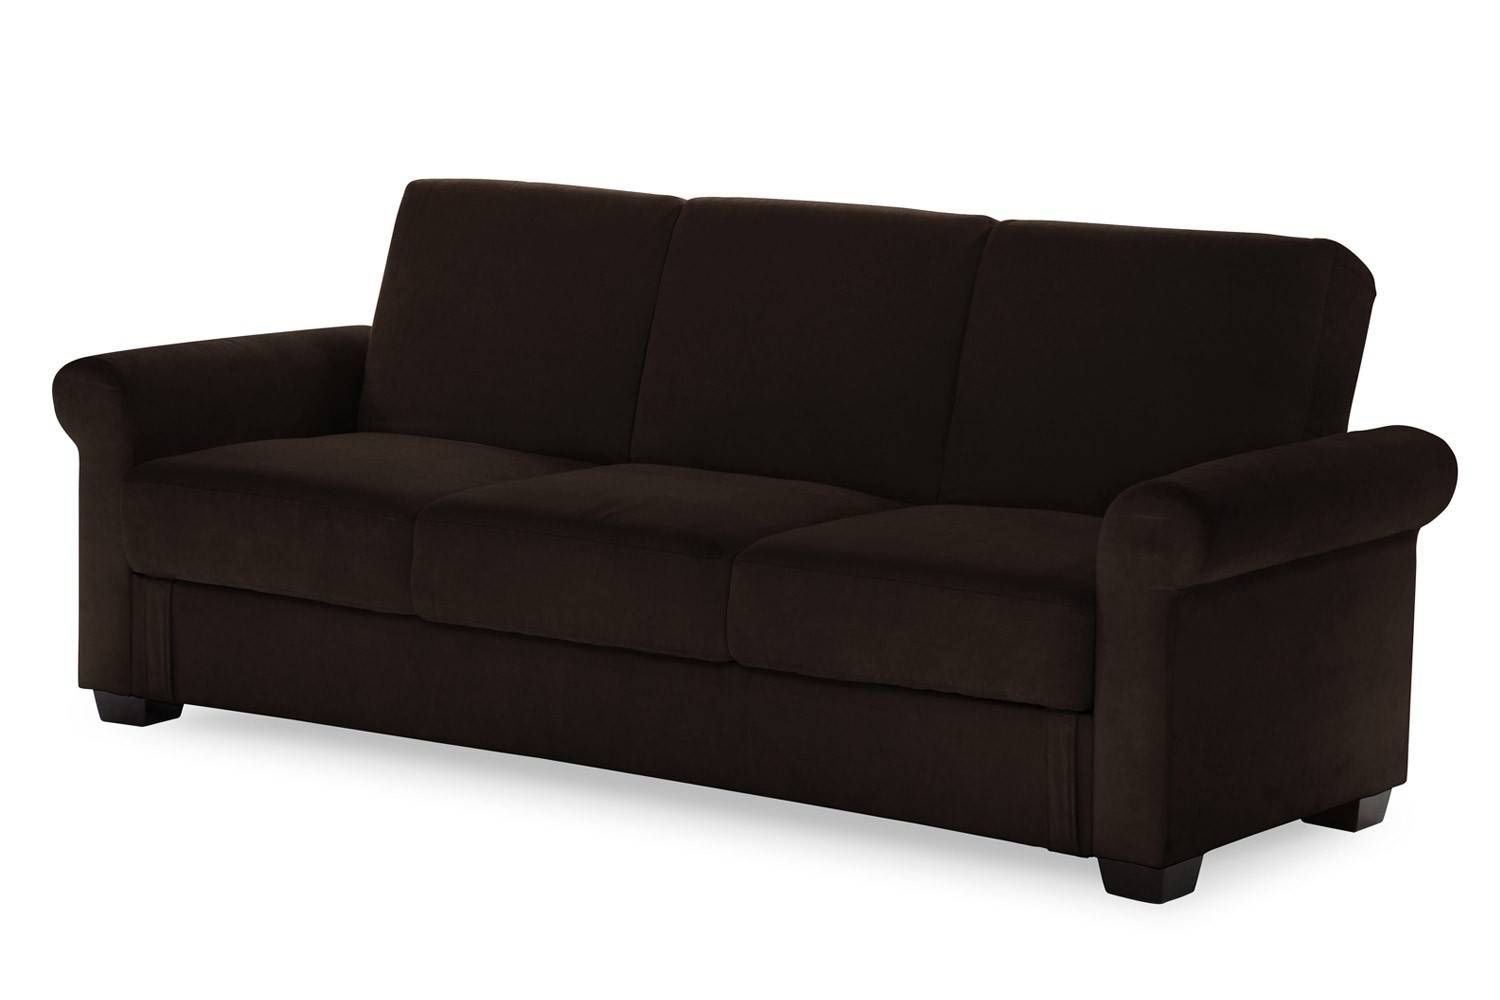 Thomas Convertible Sleeper Futon Bed | Brown Sleeper Sofa | The With Regard To Full Size Sofa Beds (View 9 of 15)